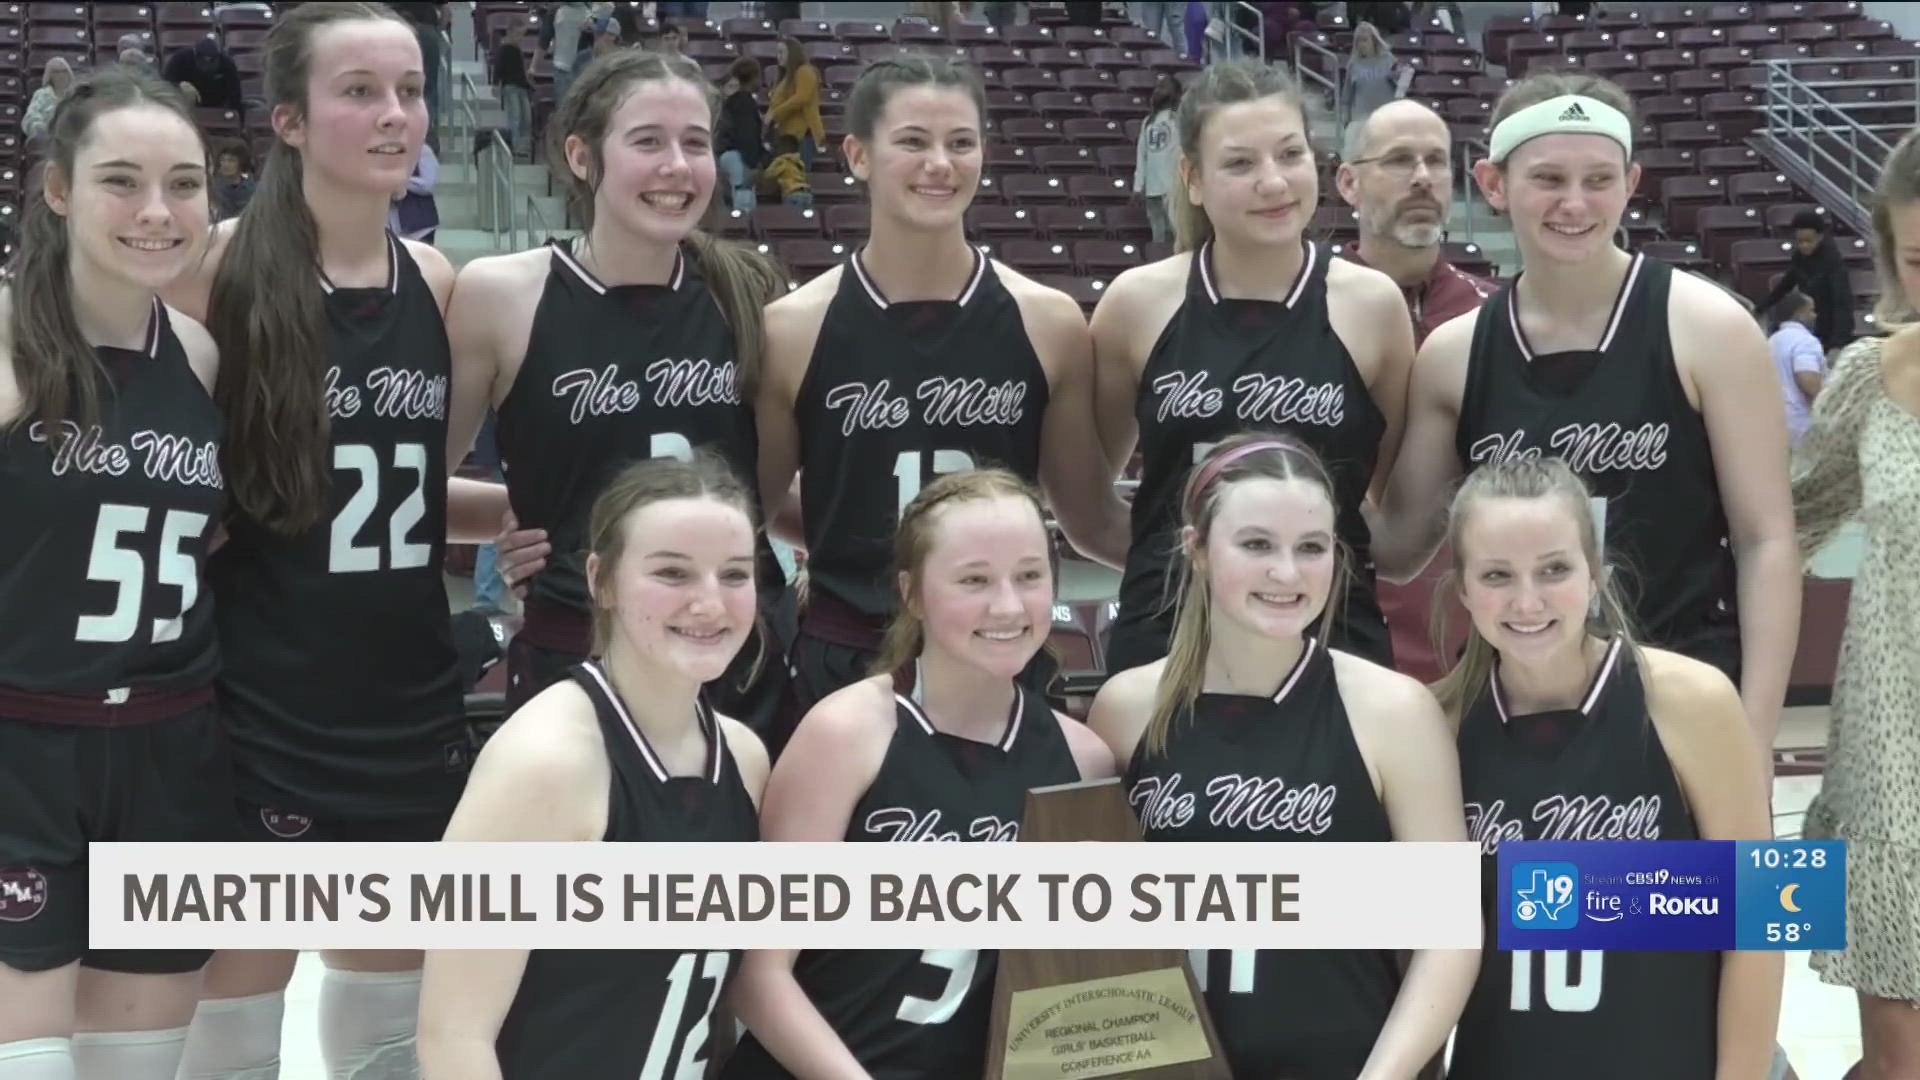 For the 17th time in program history, the Martin's Mill Lady Mustangs basketball team is headed back to the state tournament